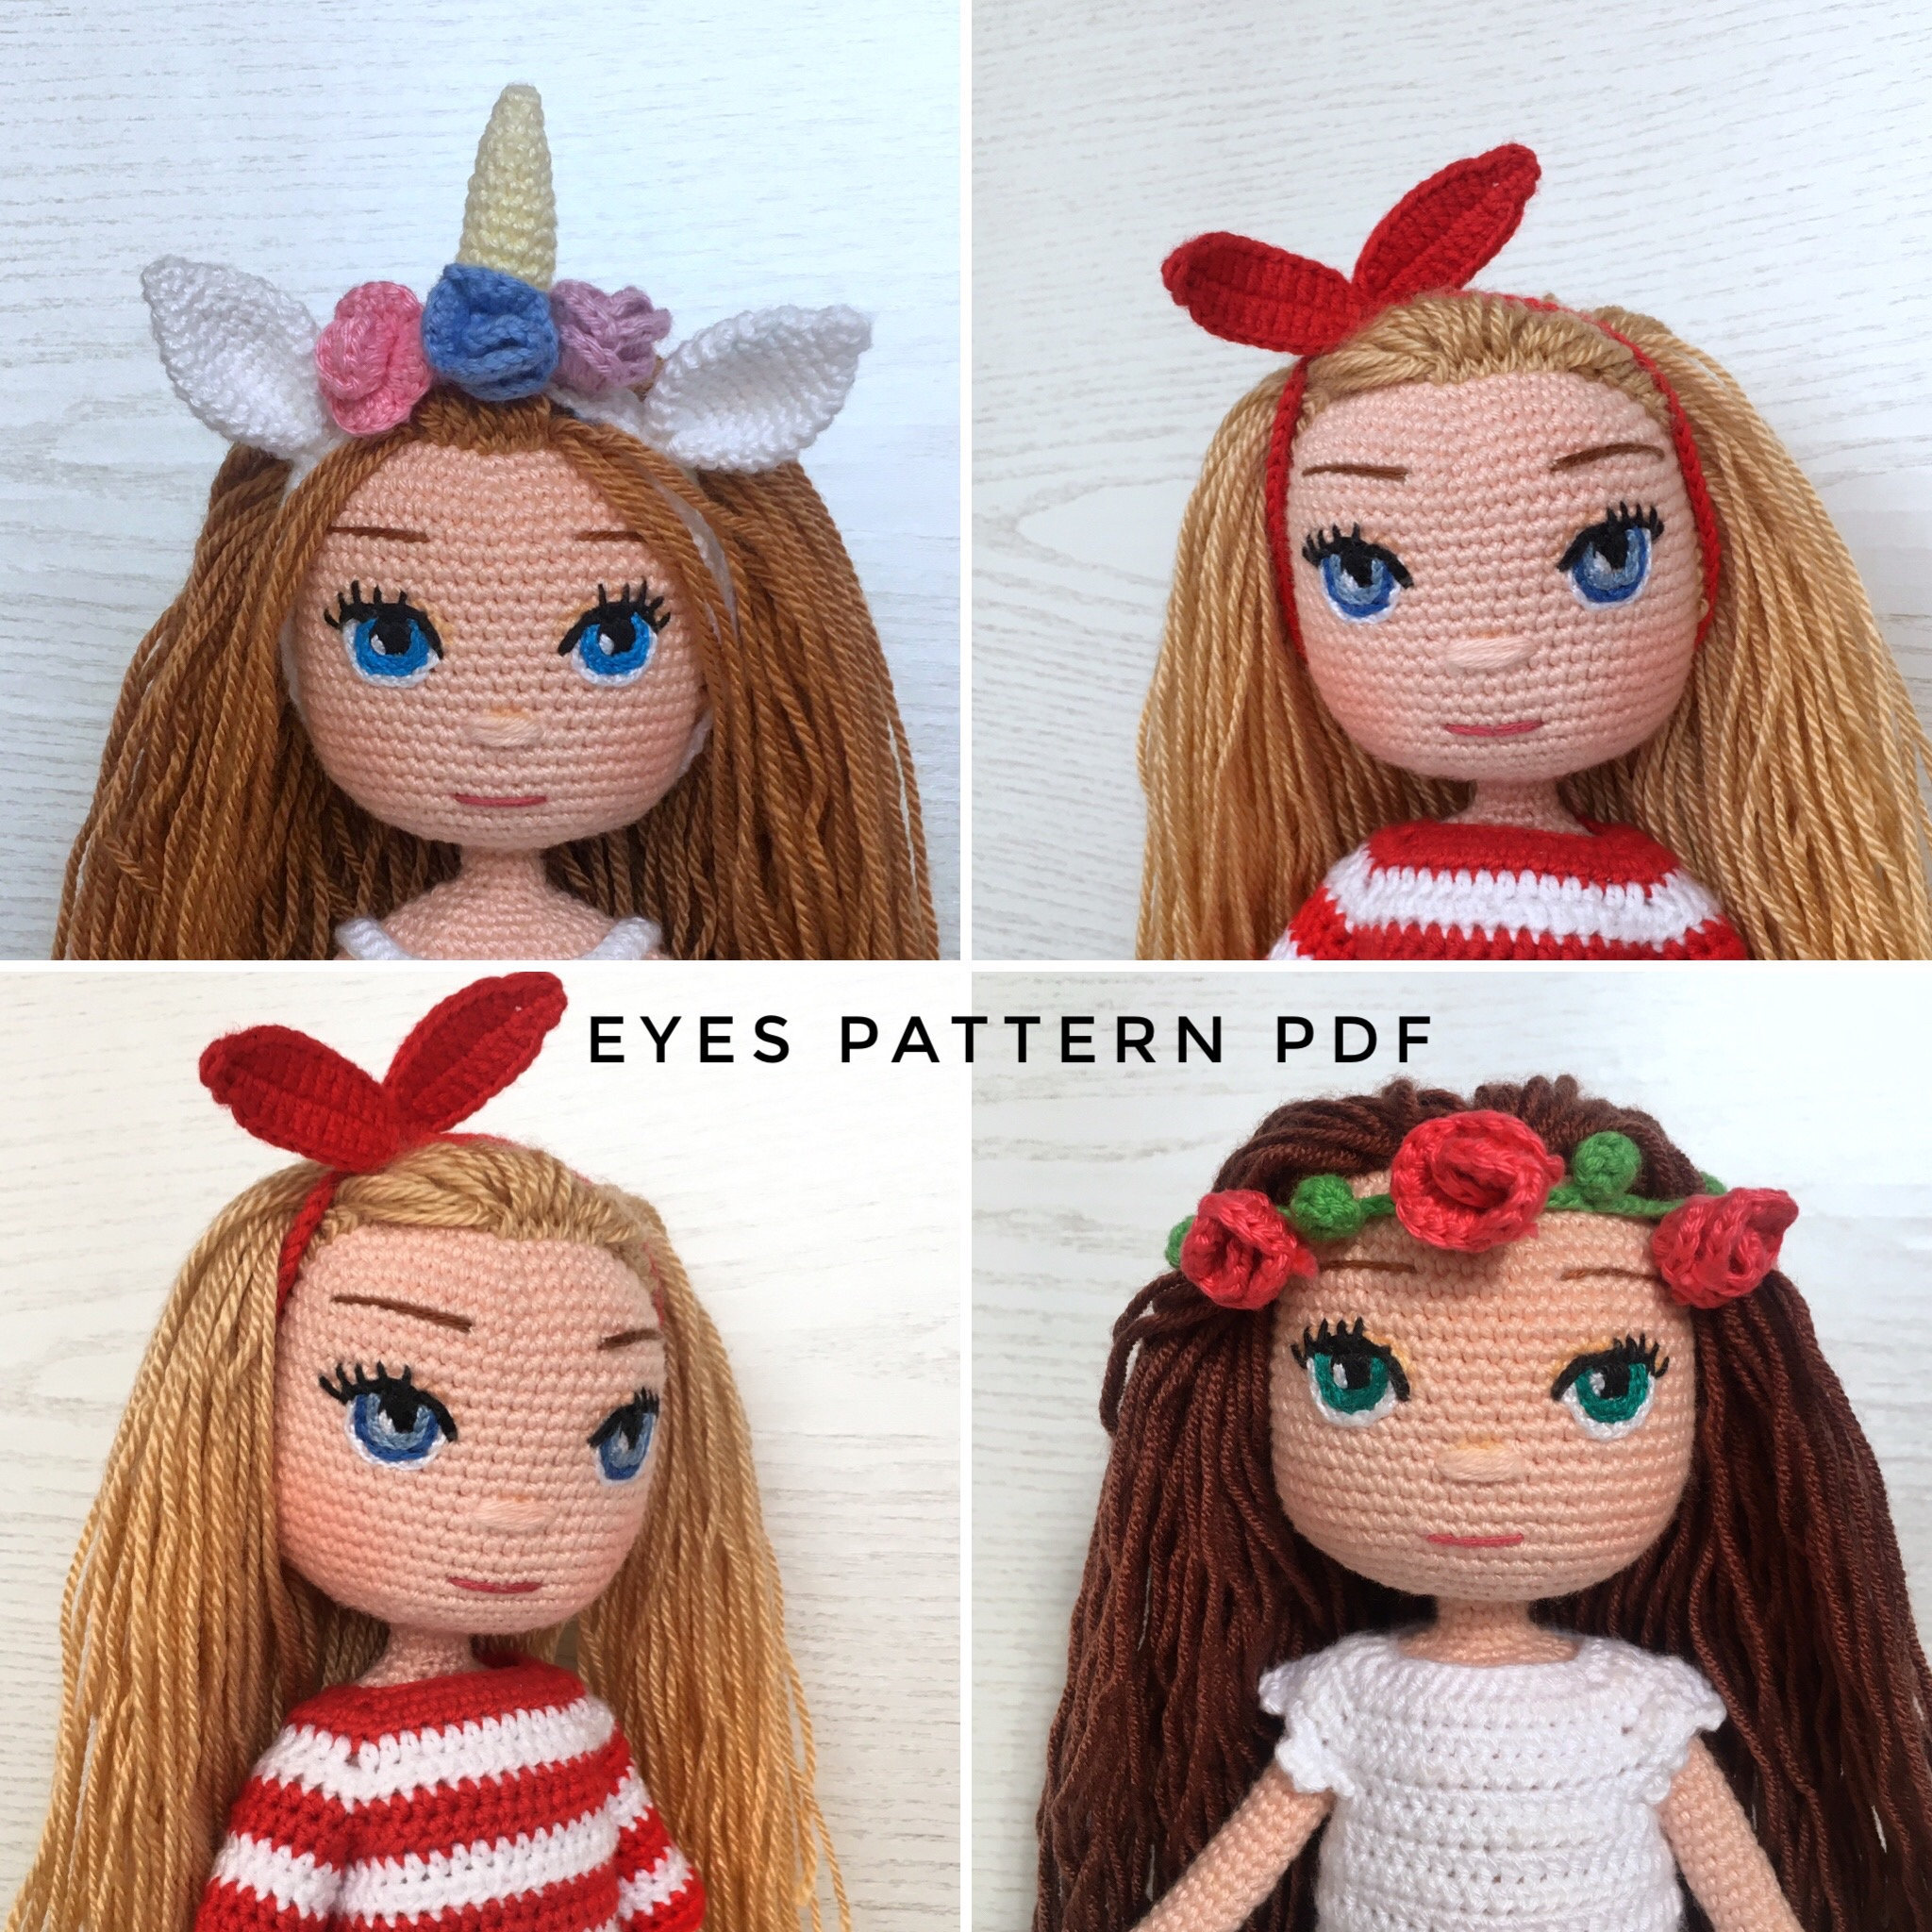 How to Sew Eyes on Amigurumi & More Face Embroidery